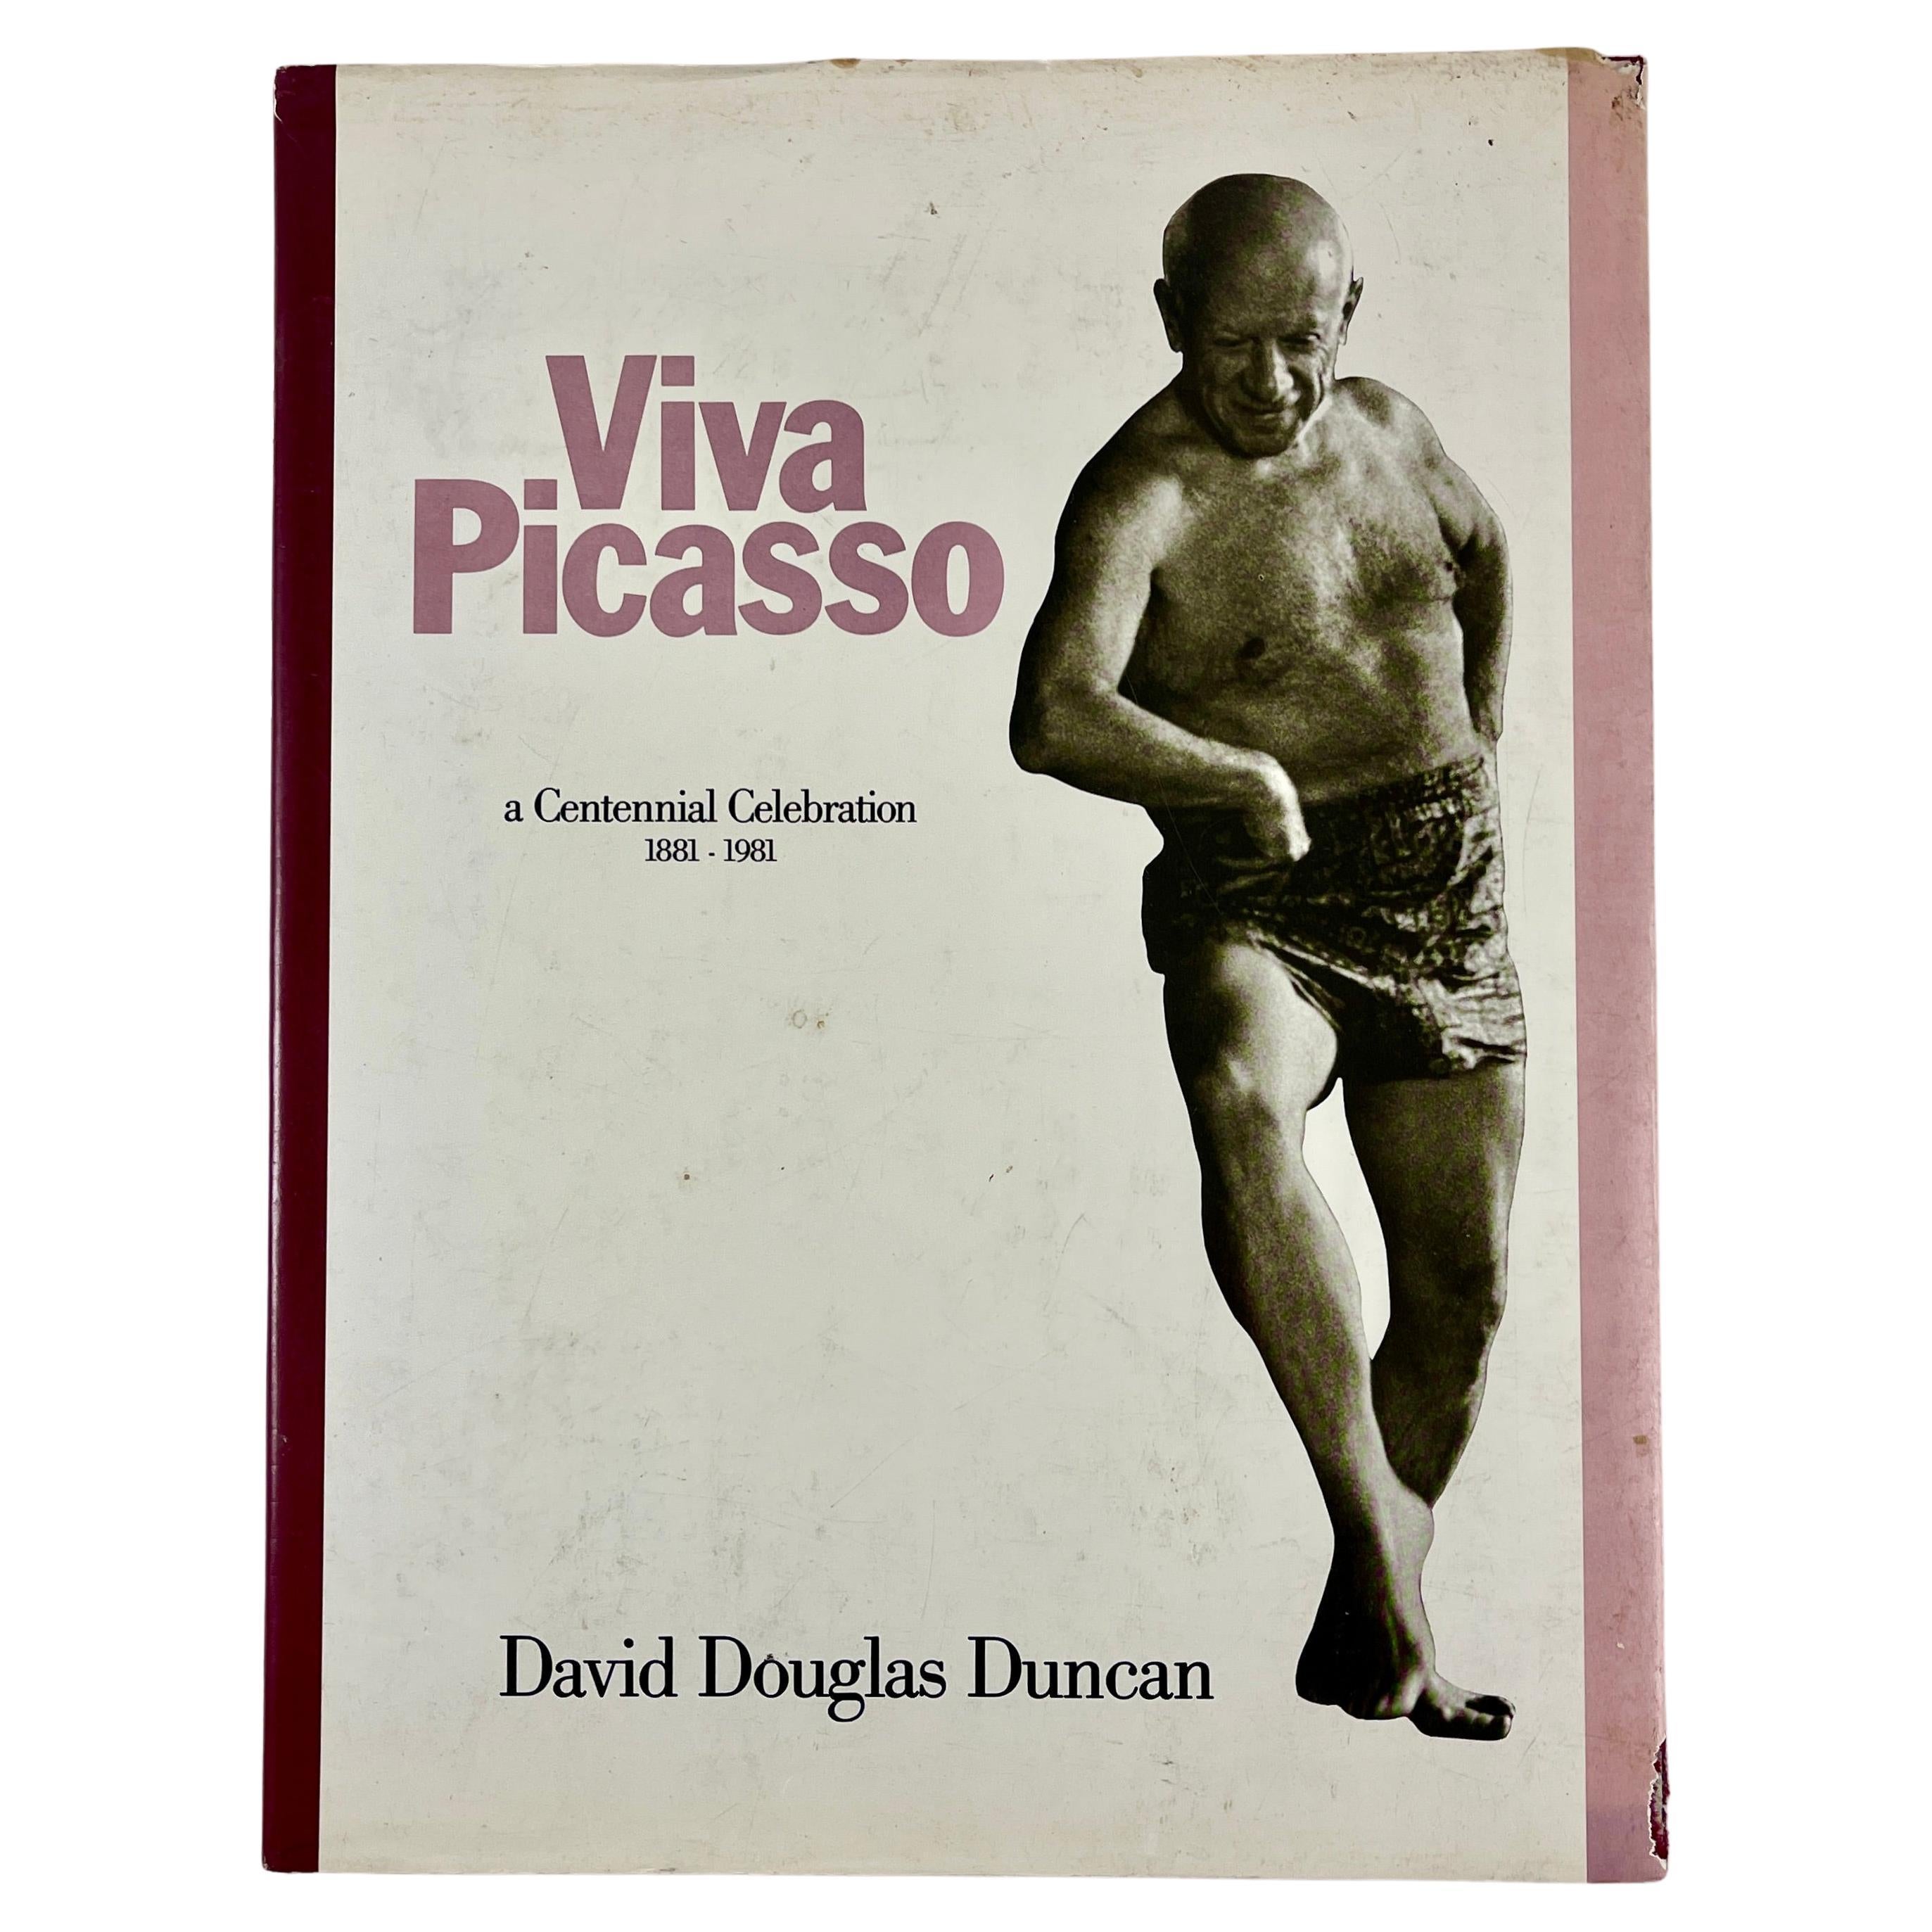 Viva Picasso: a Centennial Celebration 1881-1981 Hardcover Book with Jacket